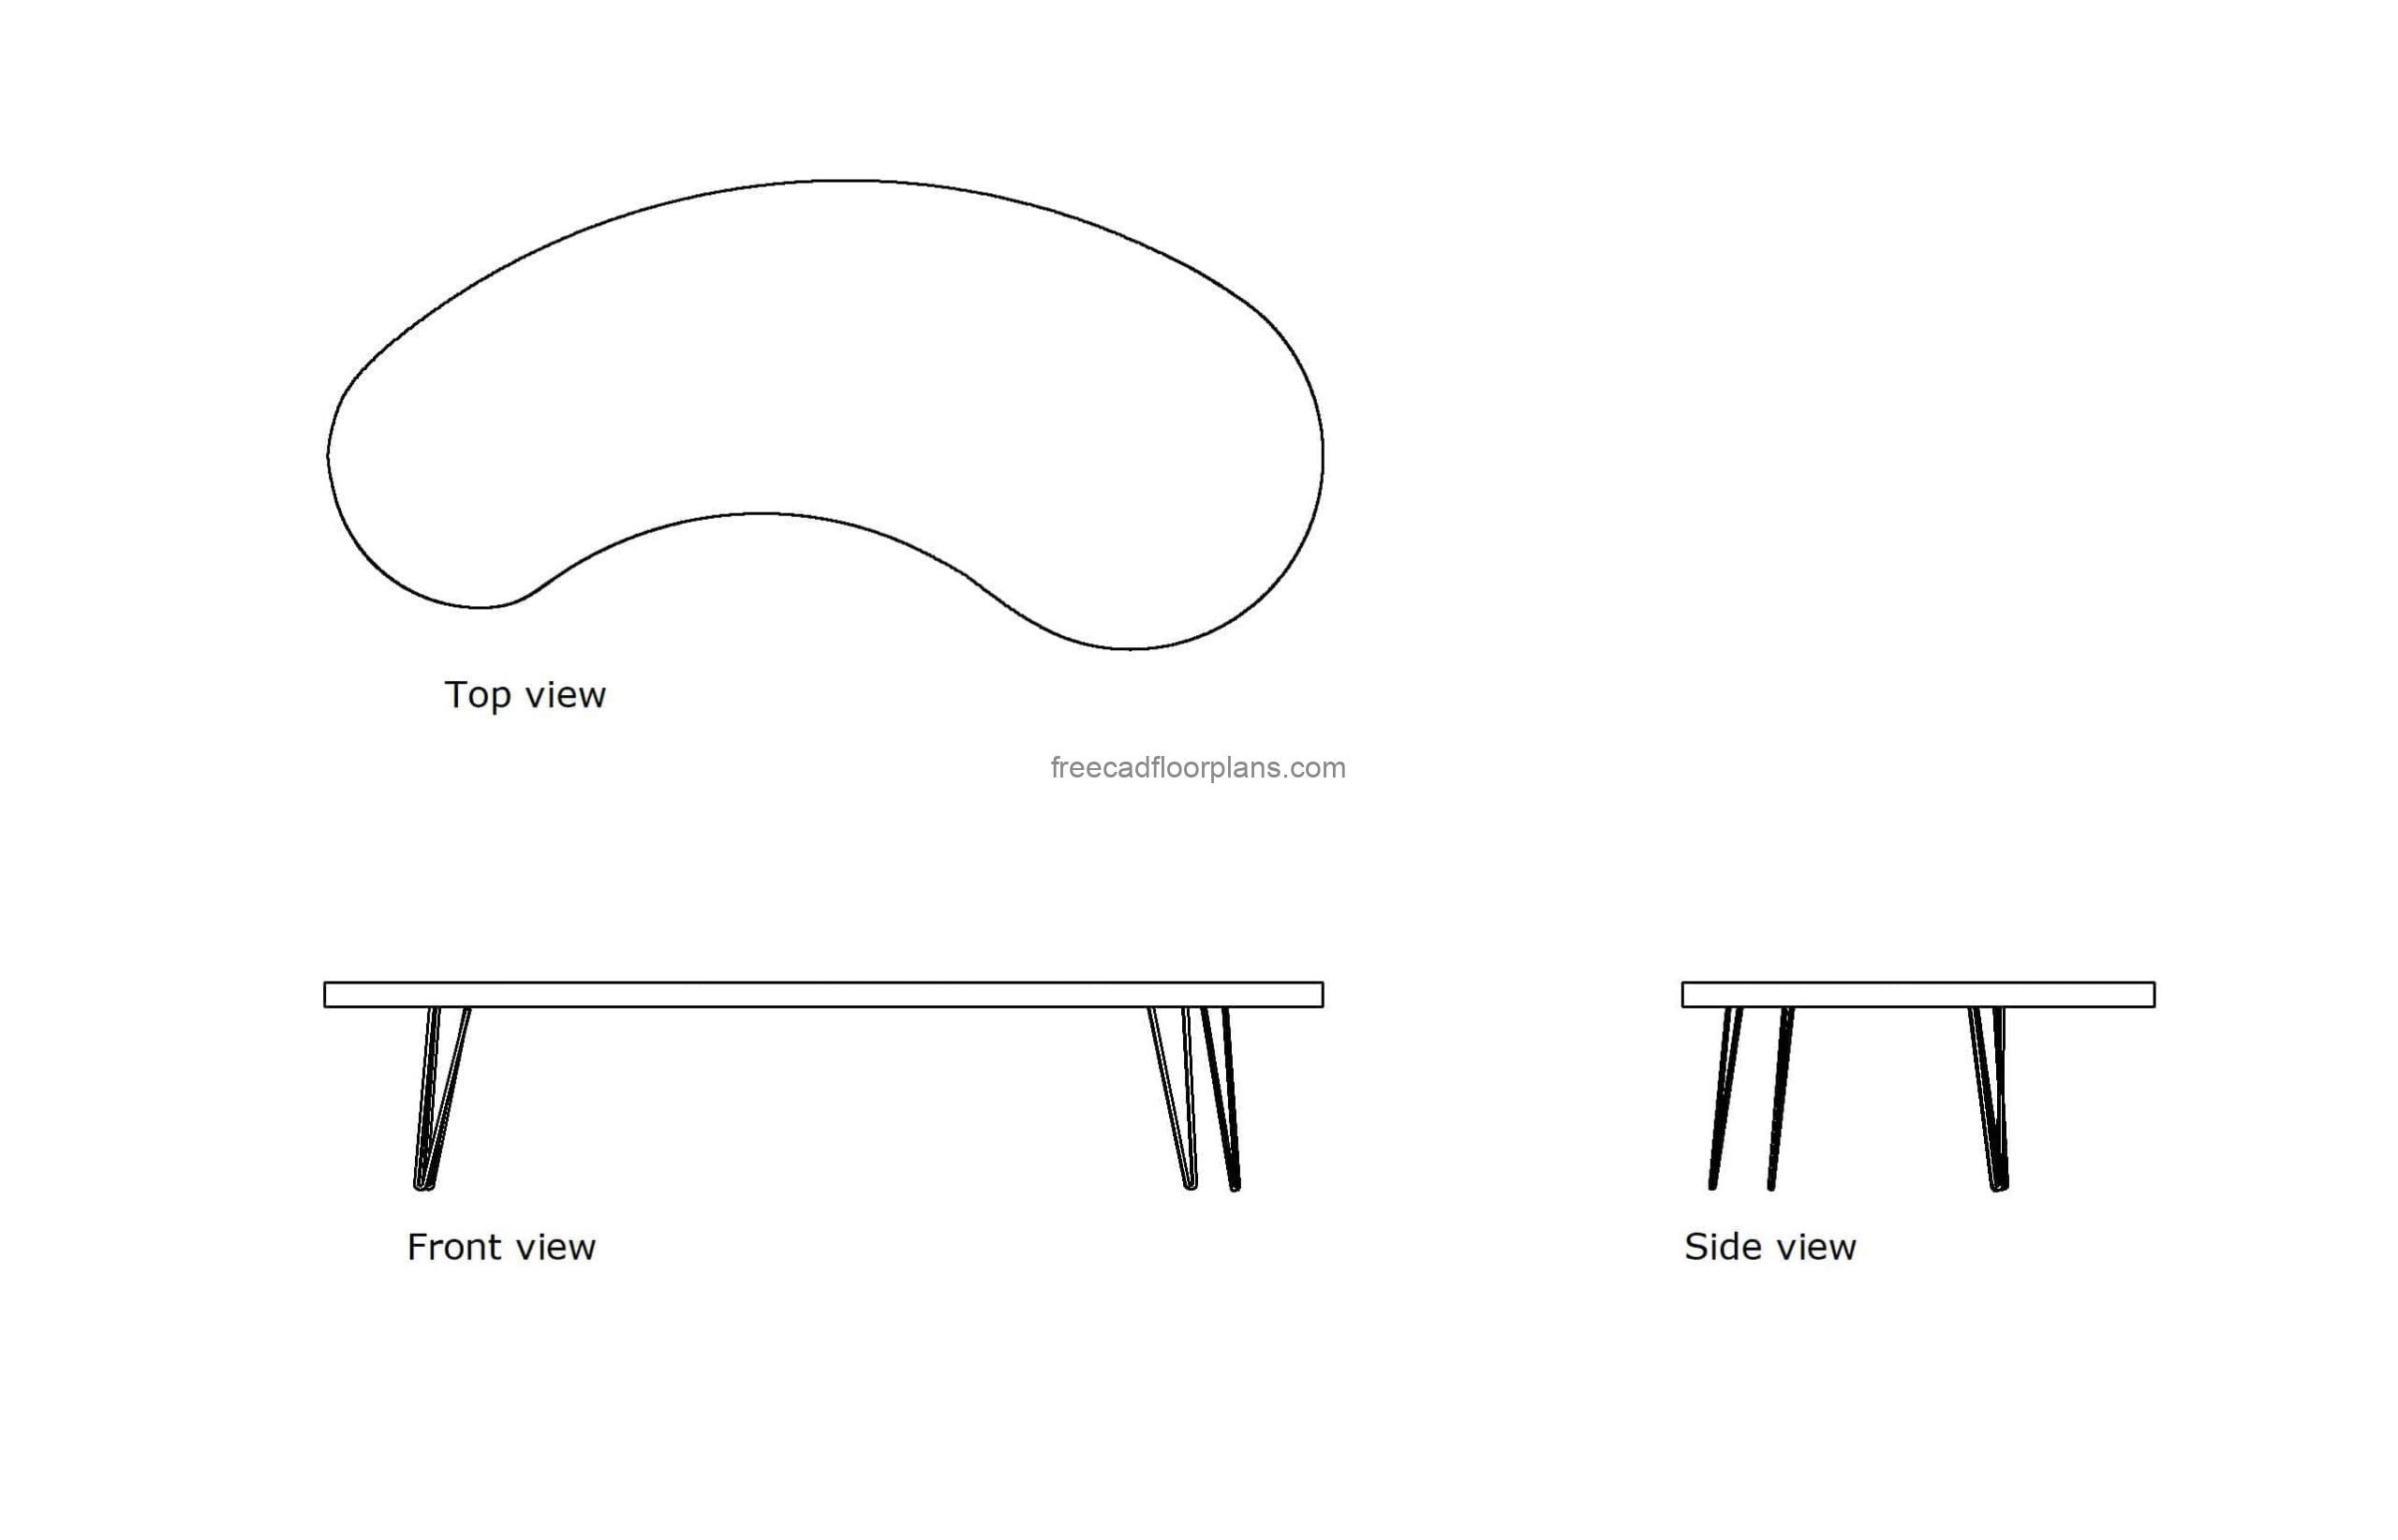 autocad drawing of a kidney desk, 2d views plan and elevation, dwg file free for download